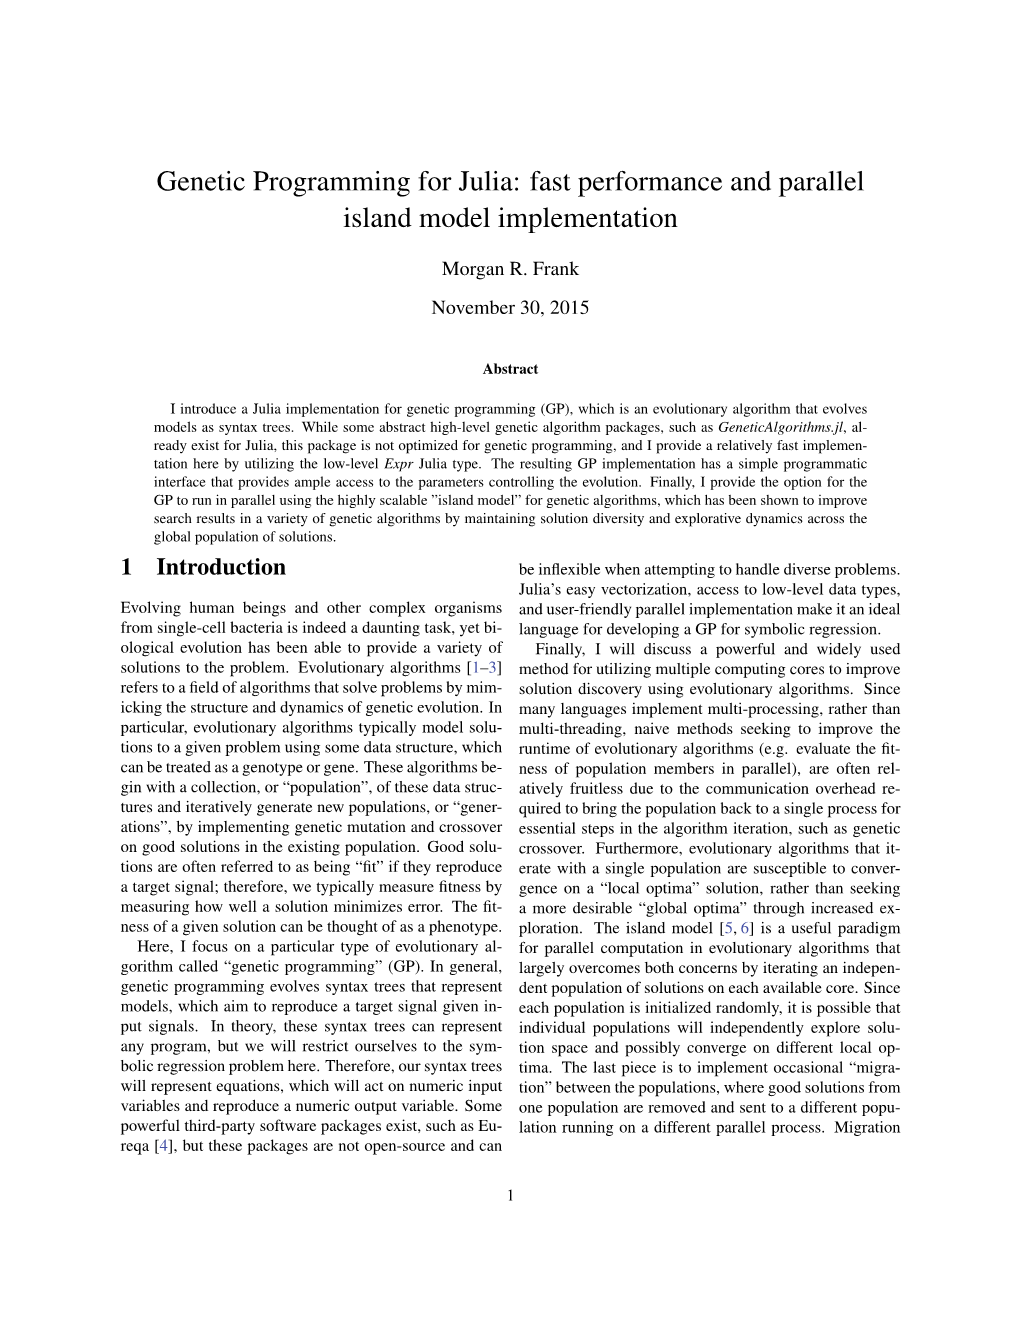 Genetic Programming for Julia: Fast Performance and Parallel Island Model Implementation